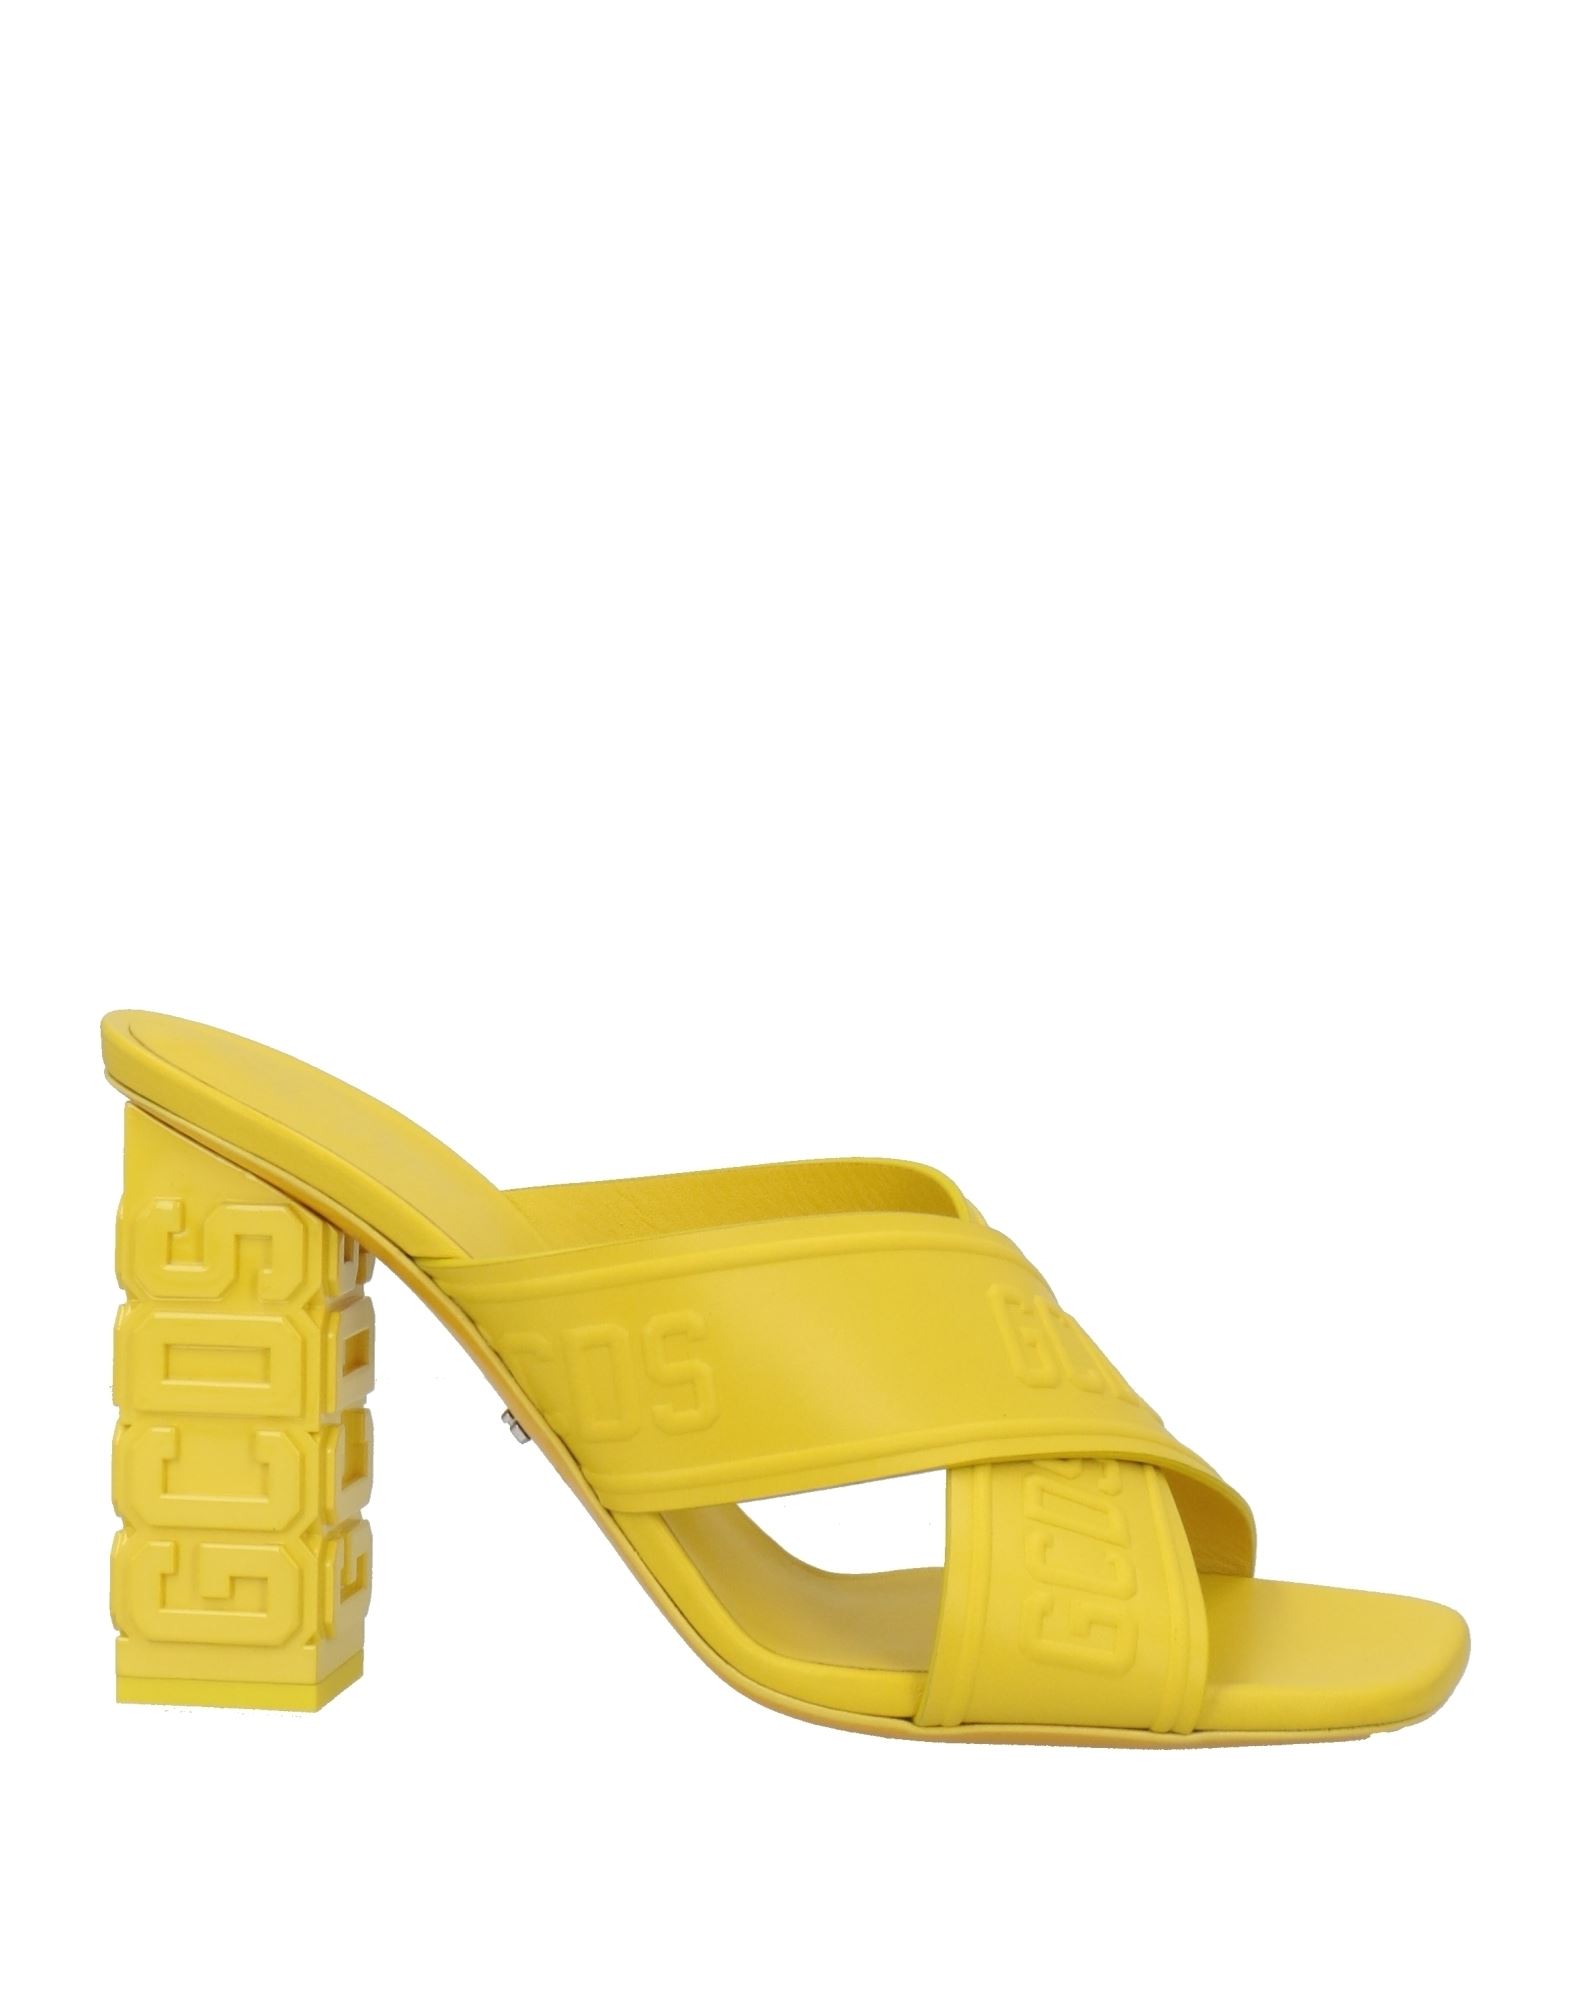 Gcds Sandals In Yellow